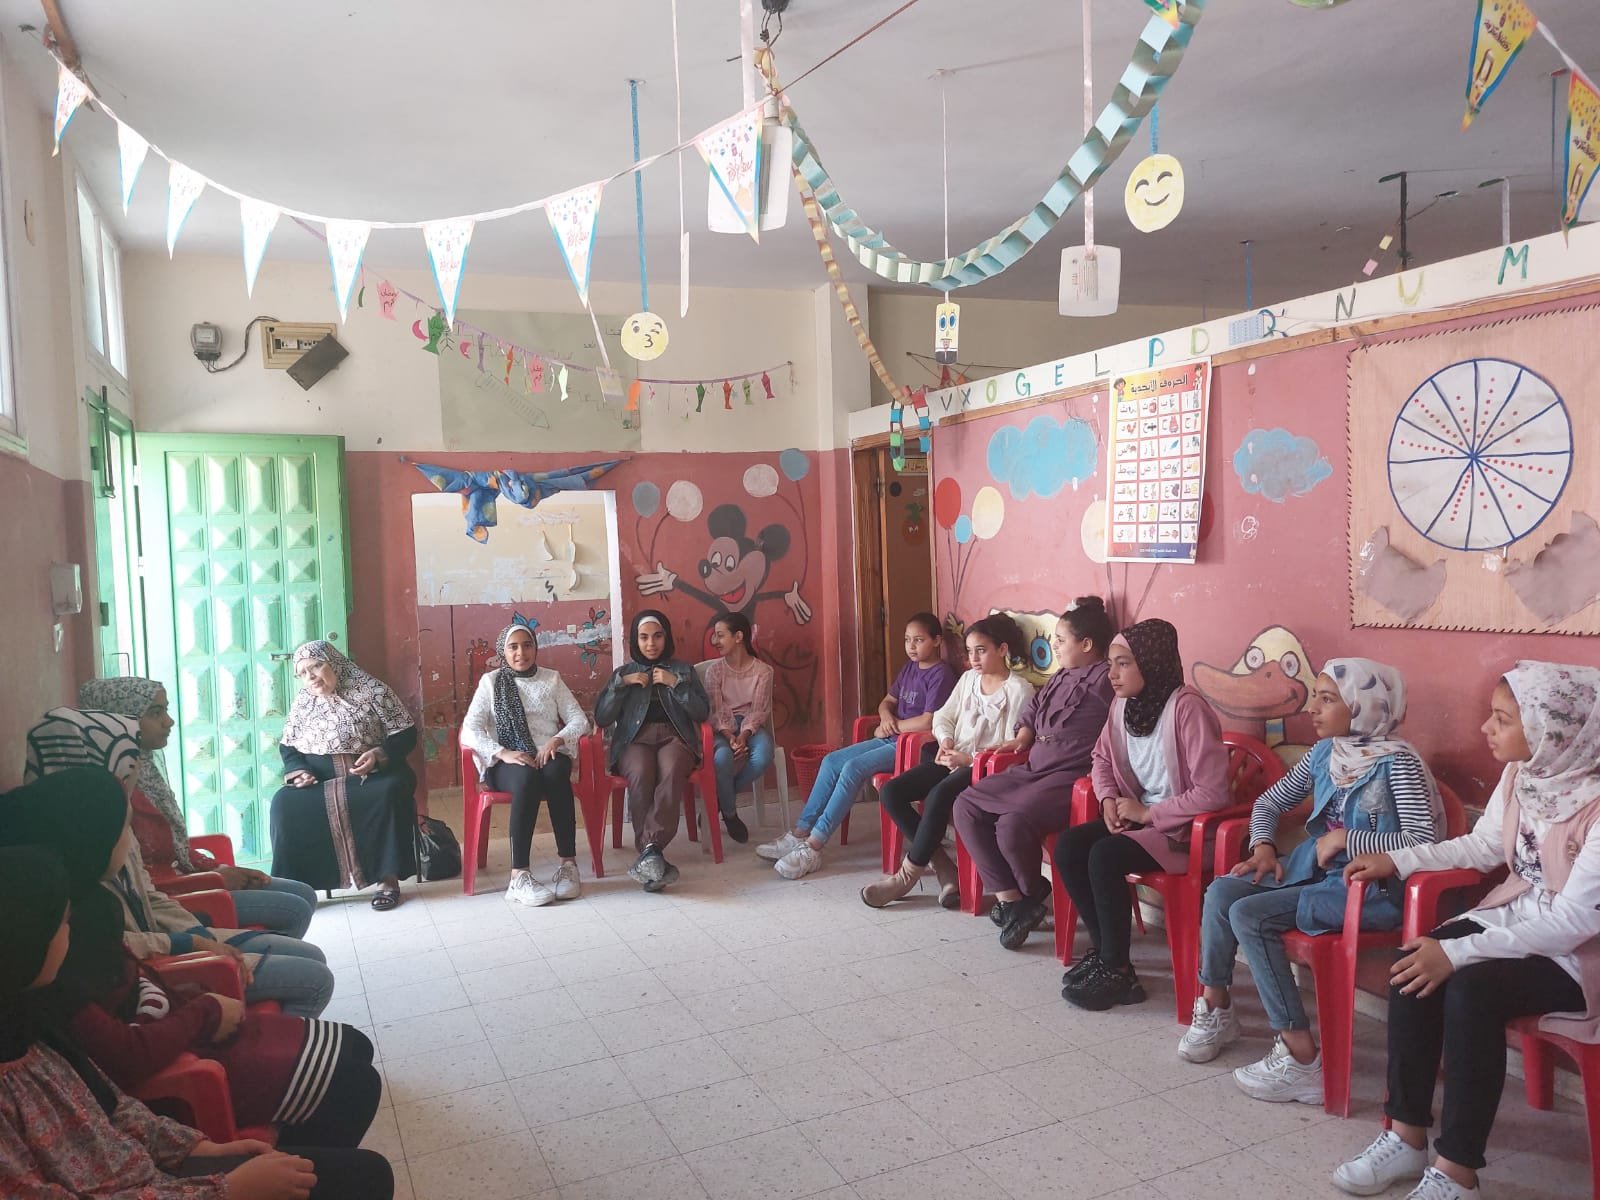  Psychosocial support meetings for women and girls in Gaza